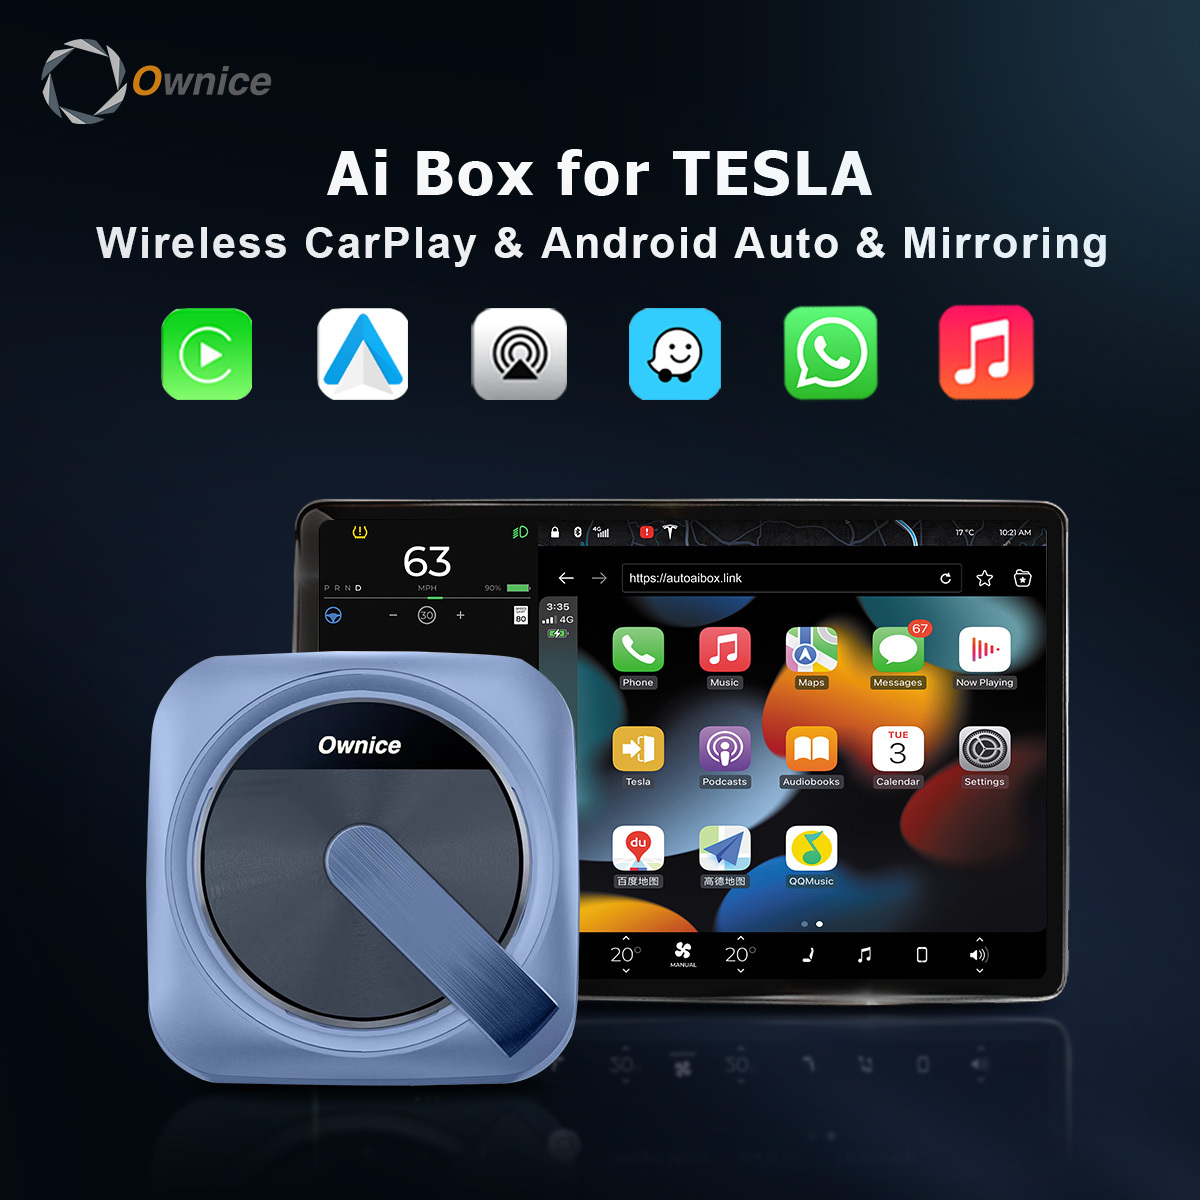 https://images.51microshop.com/12064/product/20231020/Wireless_Ownice_Carplay_Android_Auto_for_Tesla_Connect_Siri_Assistant_Control_Bluetooth_for_Spotify_Waze_Google_Map_No_Need_Sim_1697767828318_9.jpg